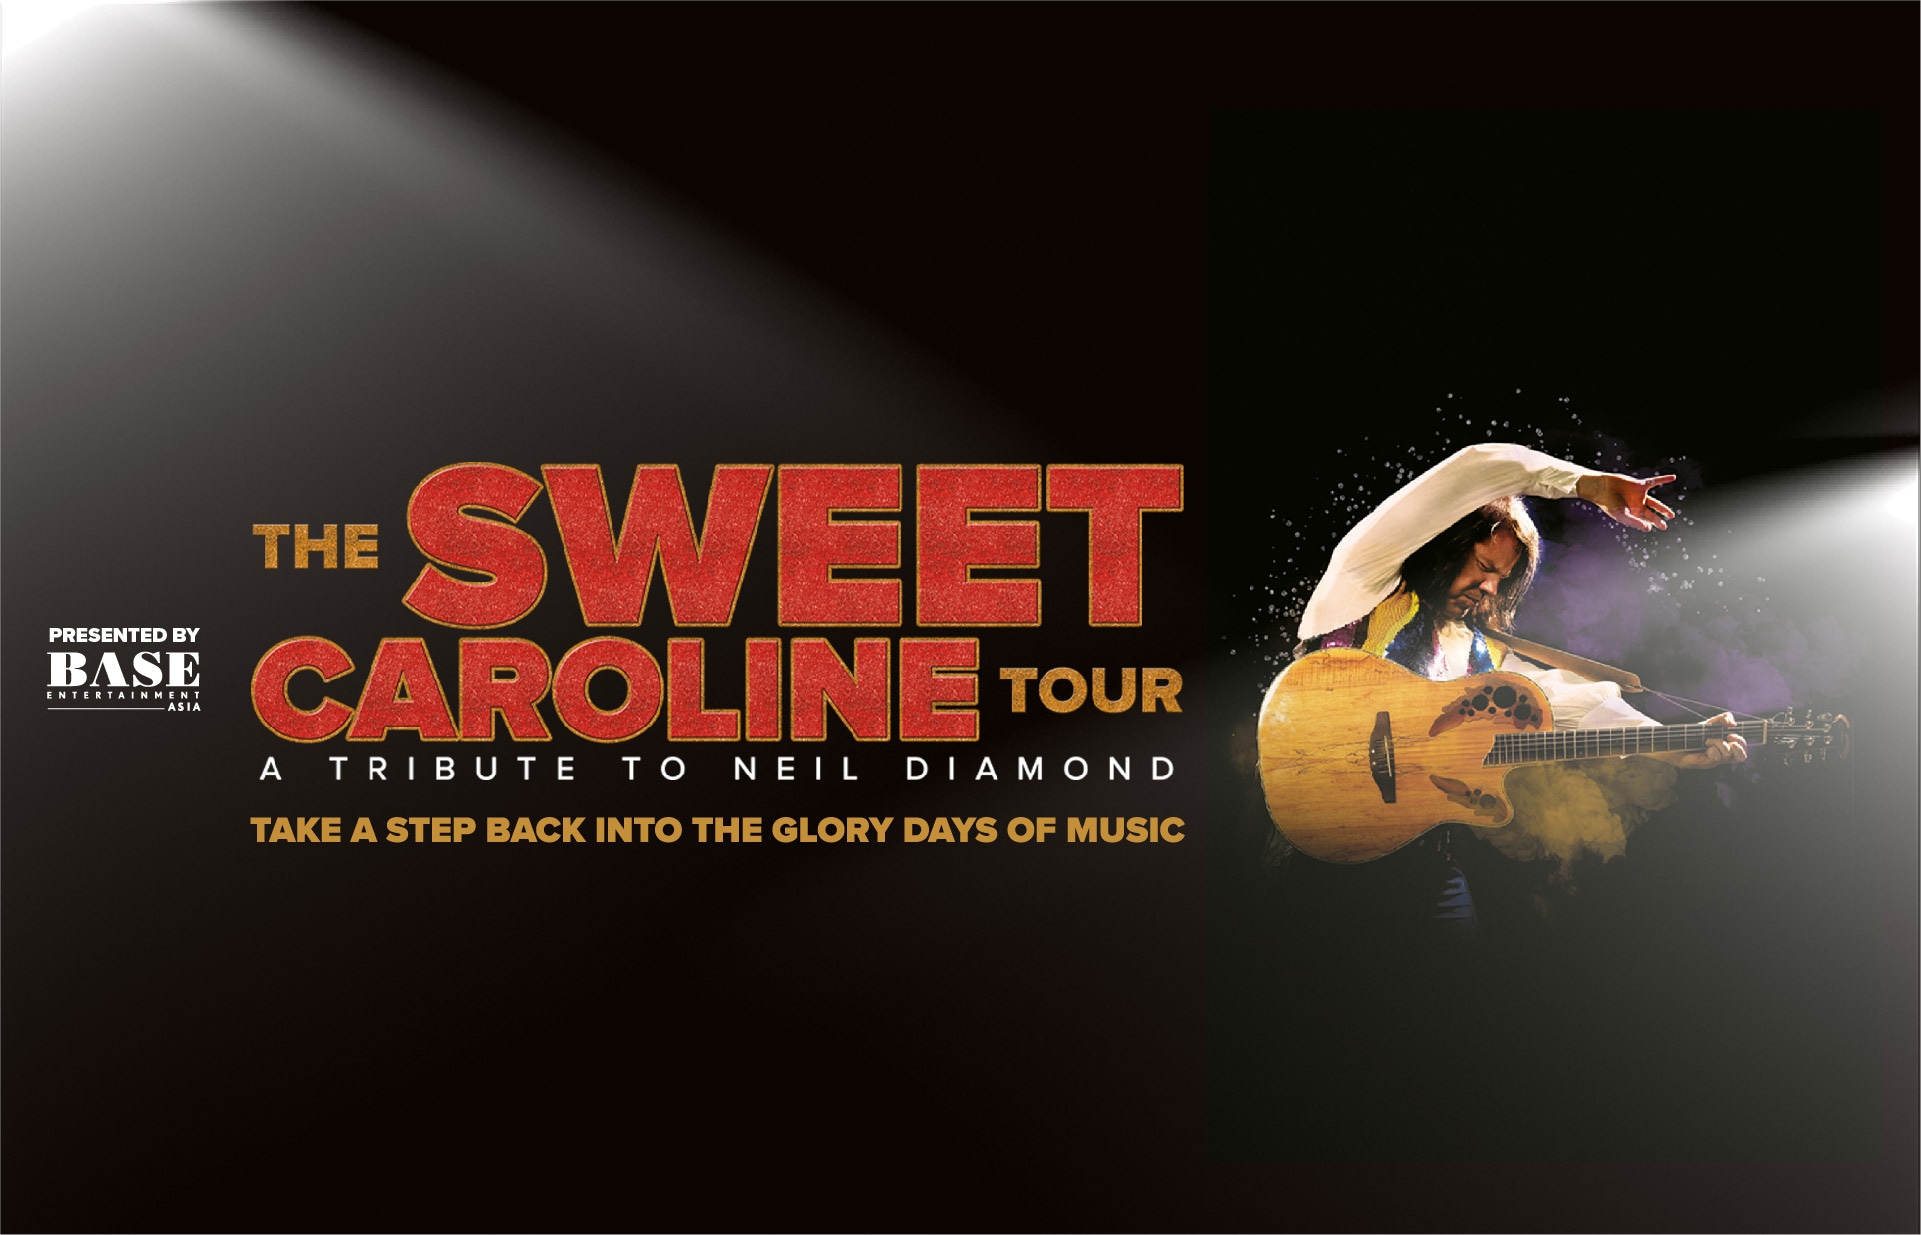 Concert: A Tribute to Neil Diamond in Singapore, Sands Theatre